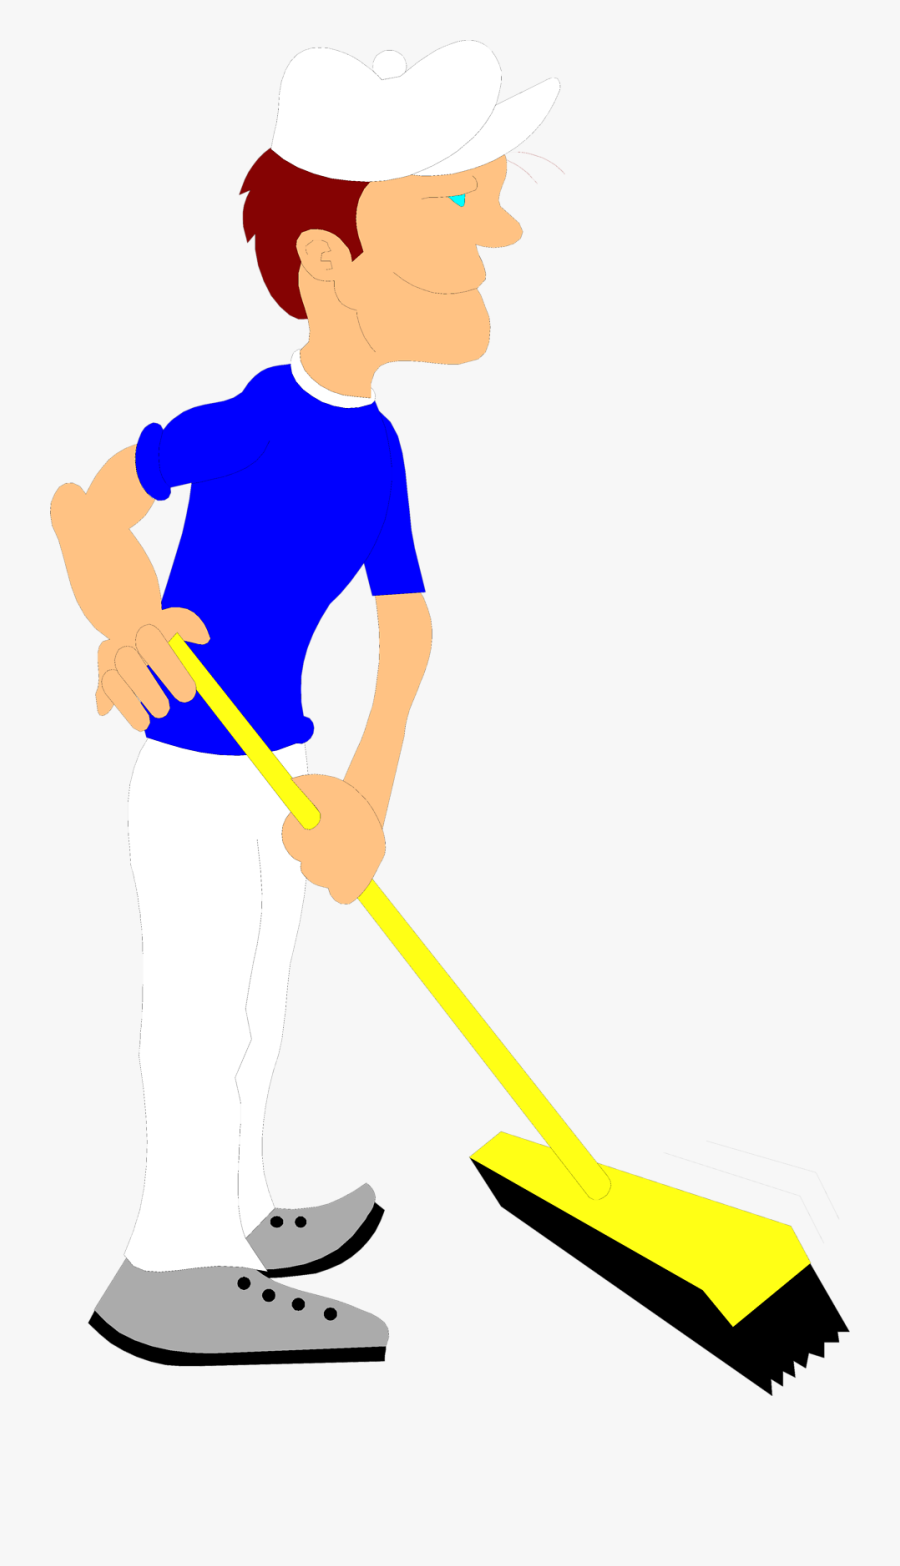 Janitor - Janitor Transparent Background, Transparent Clipart